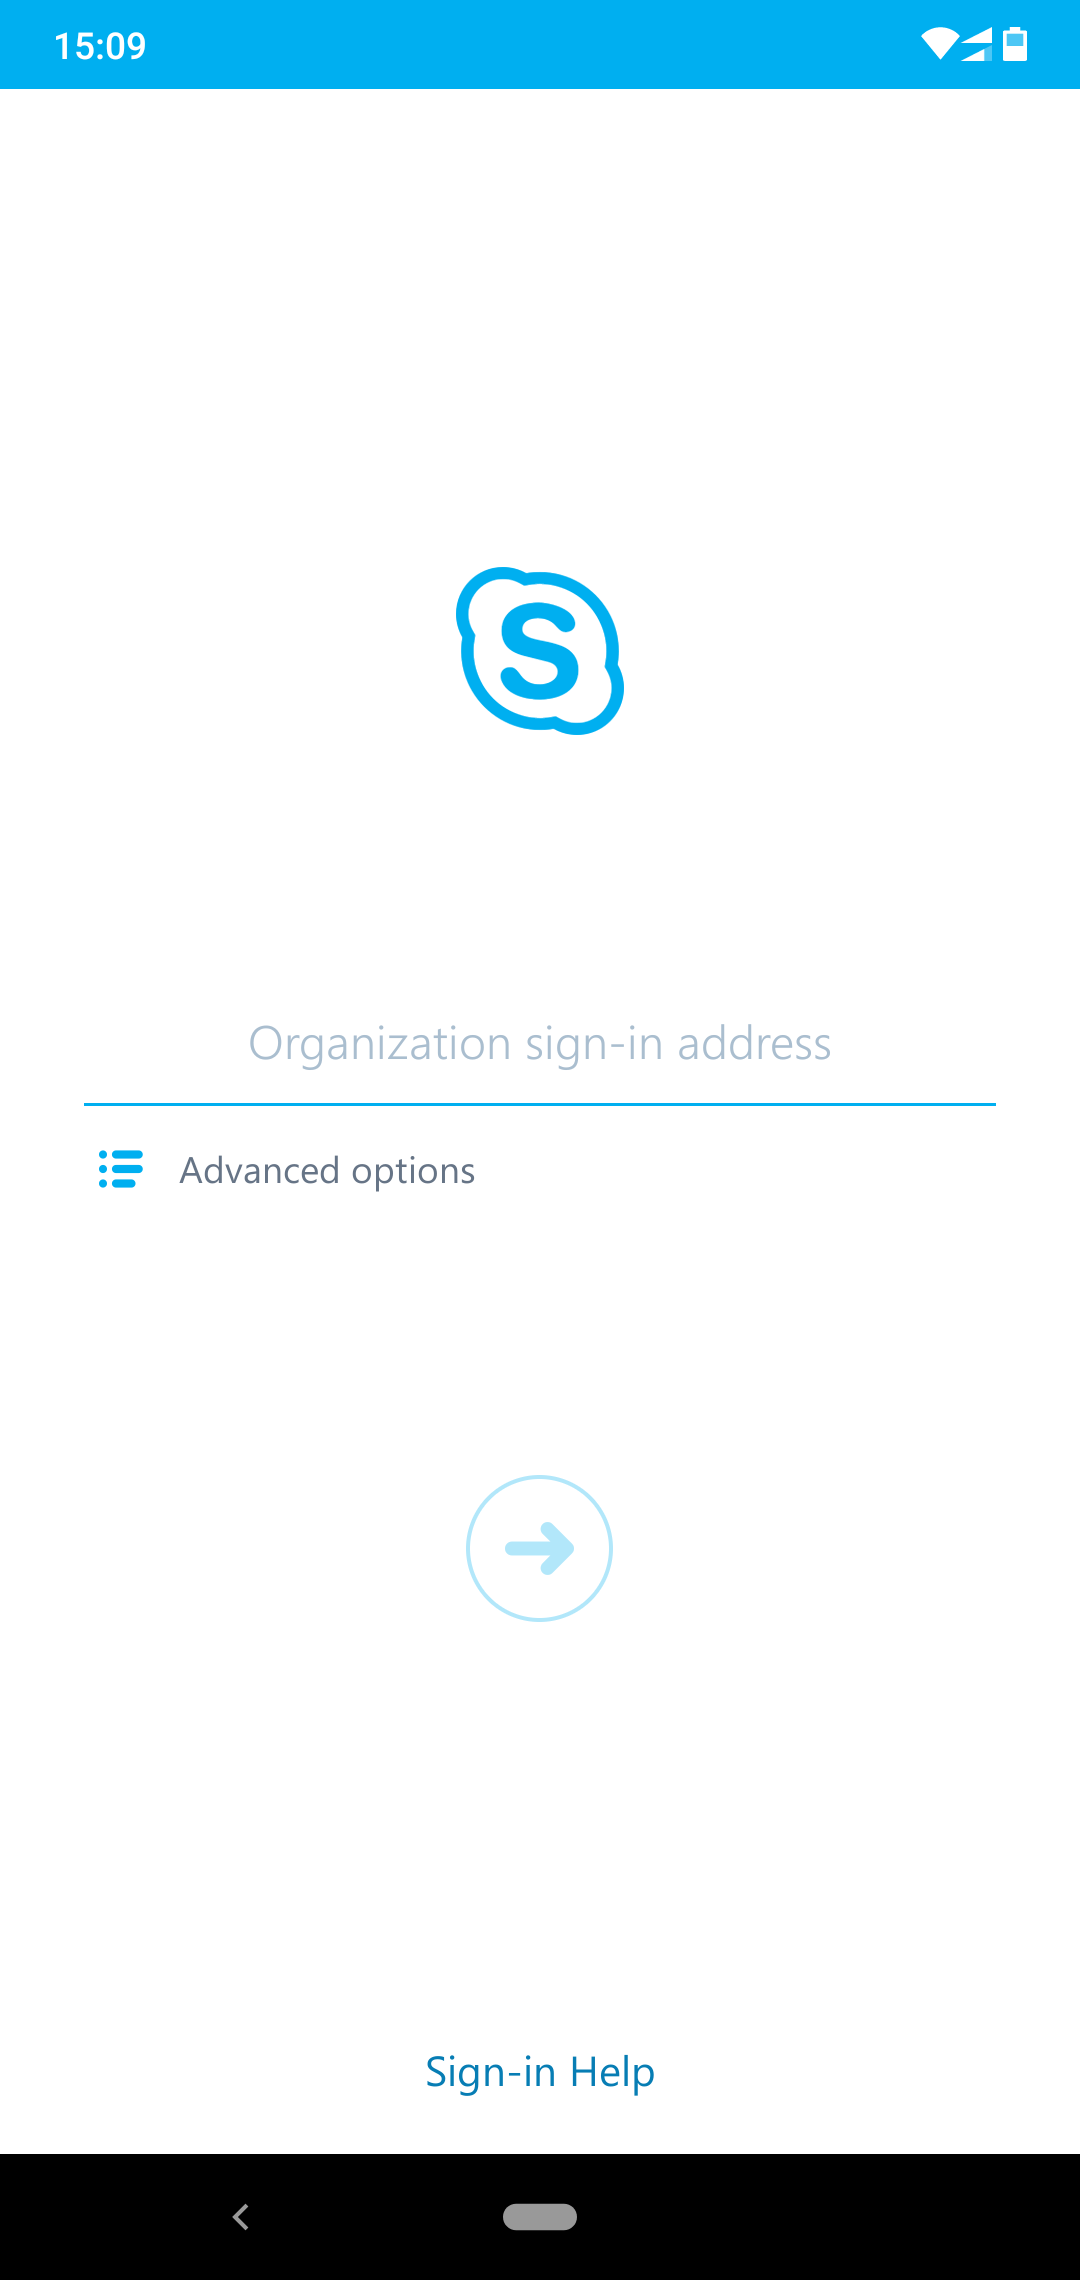 skype for android 4.1.1